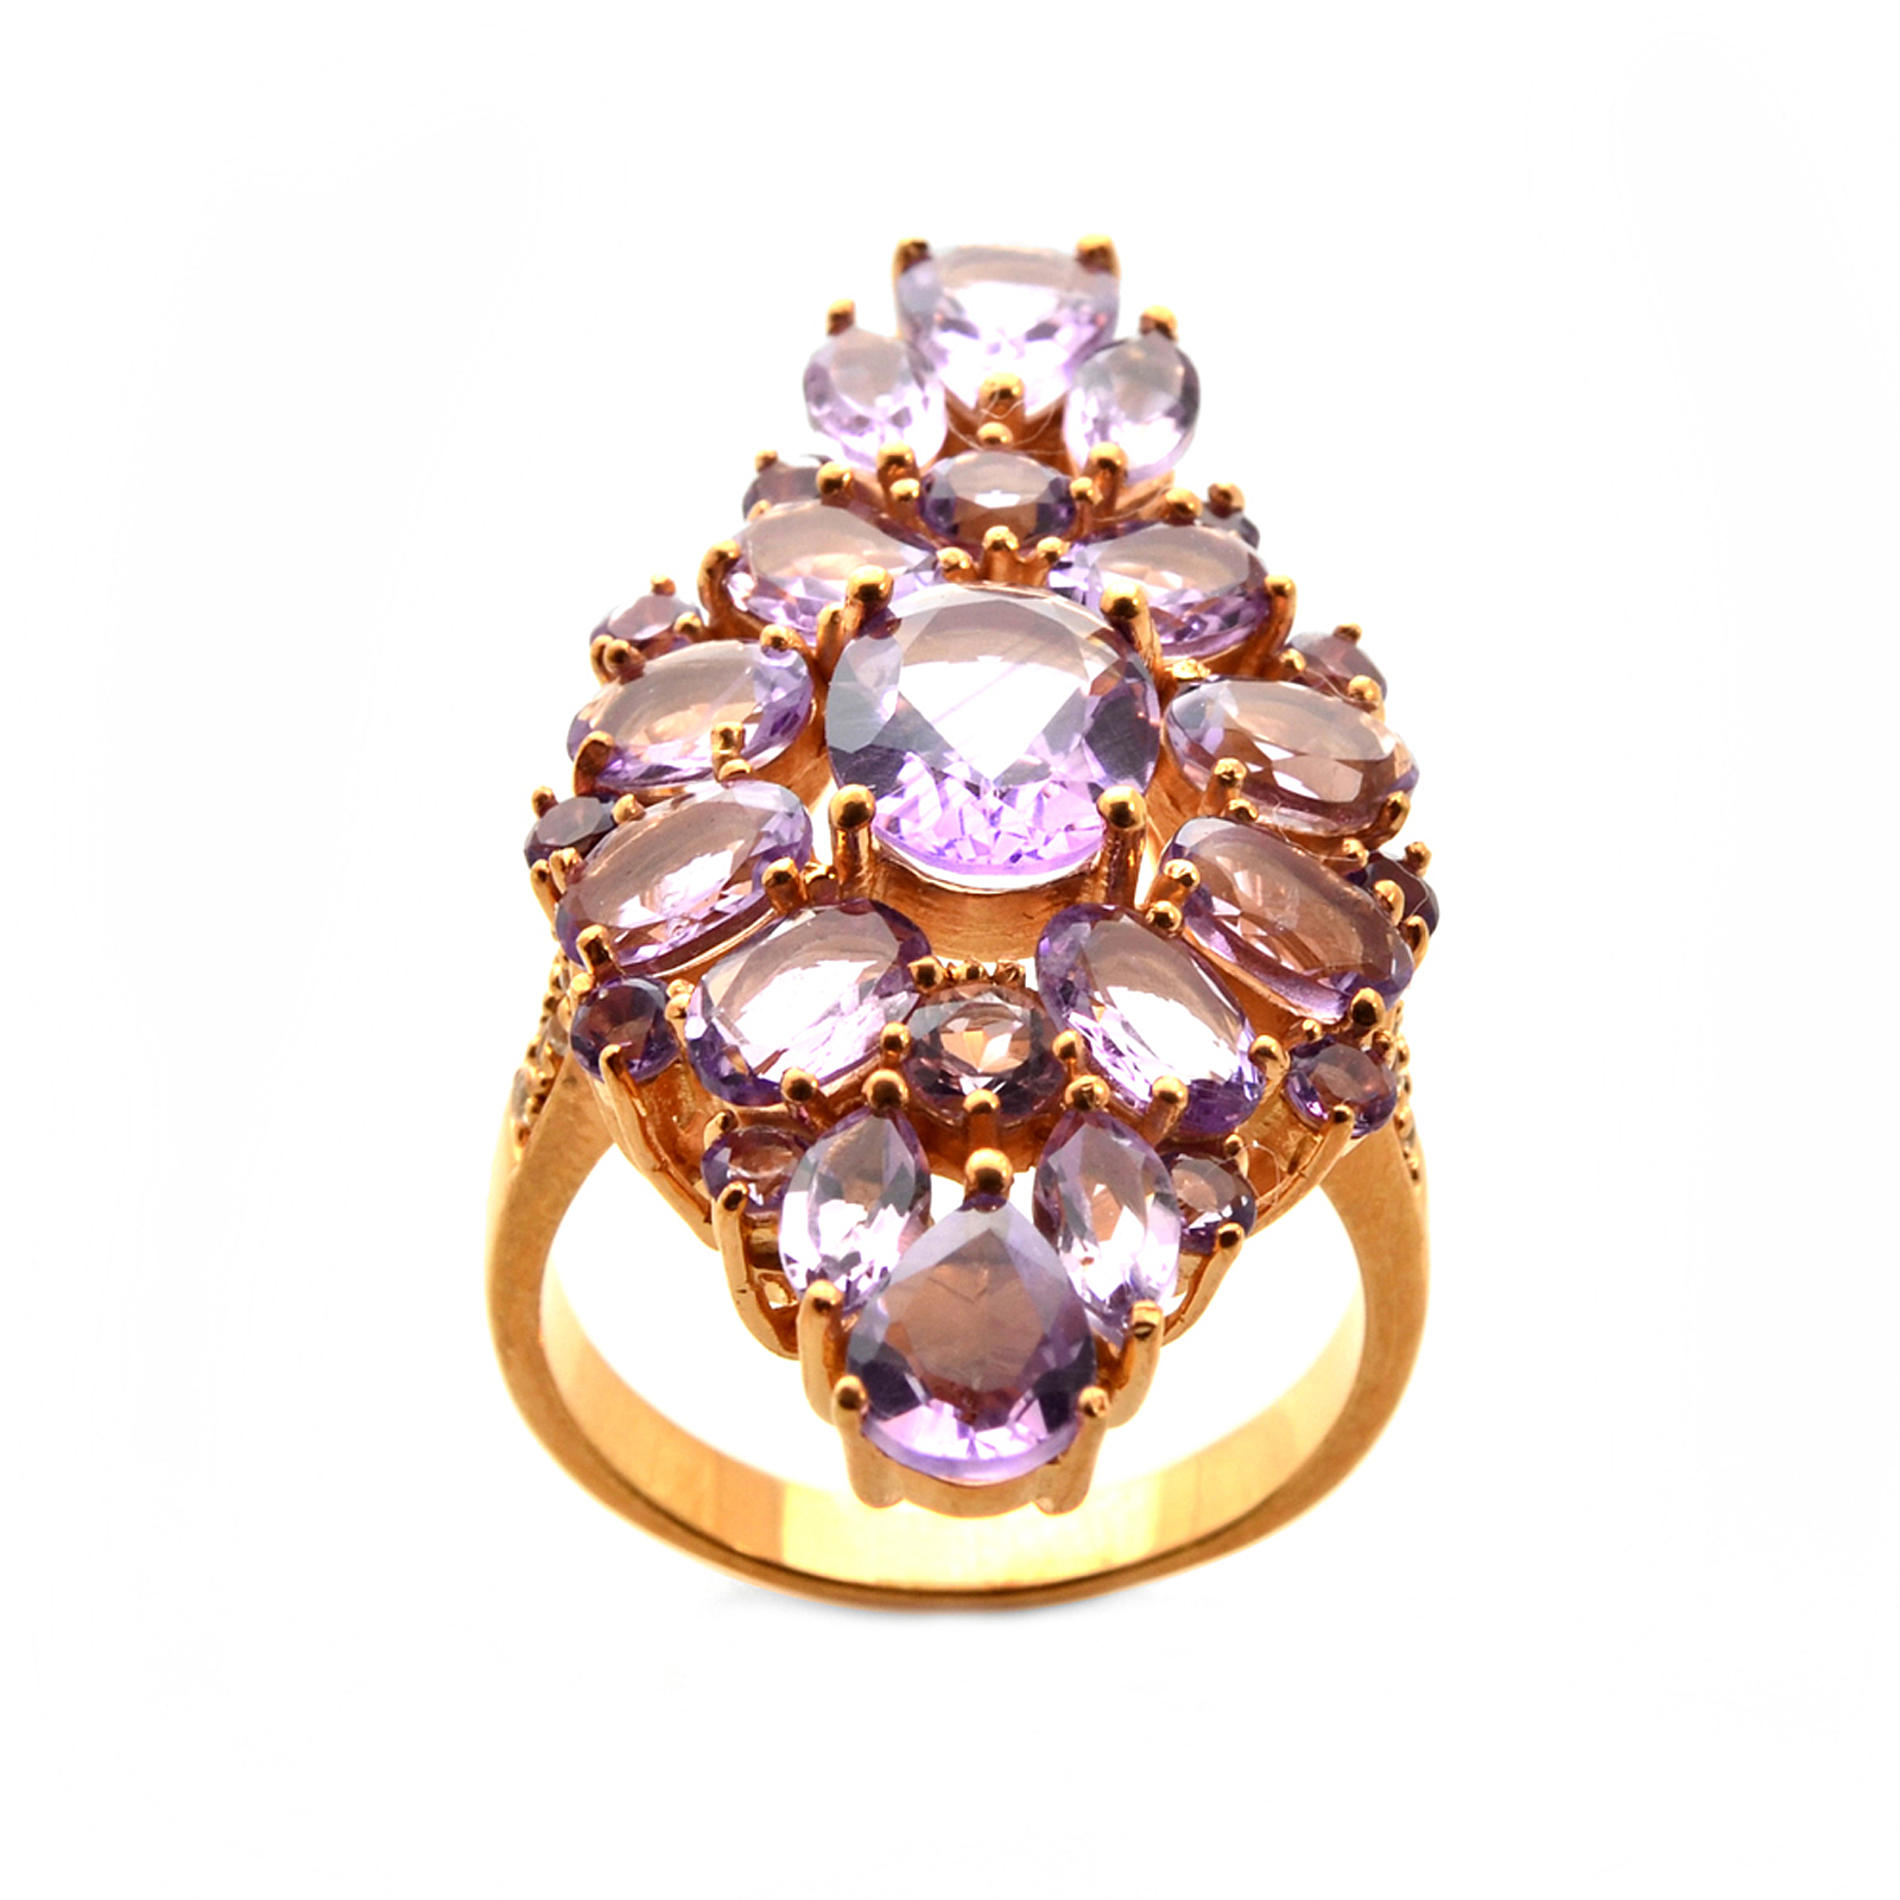 2.14 Carat Amethyst and White Topaz Shield Ring